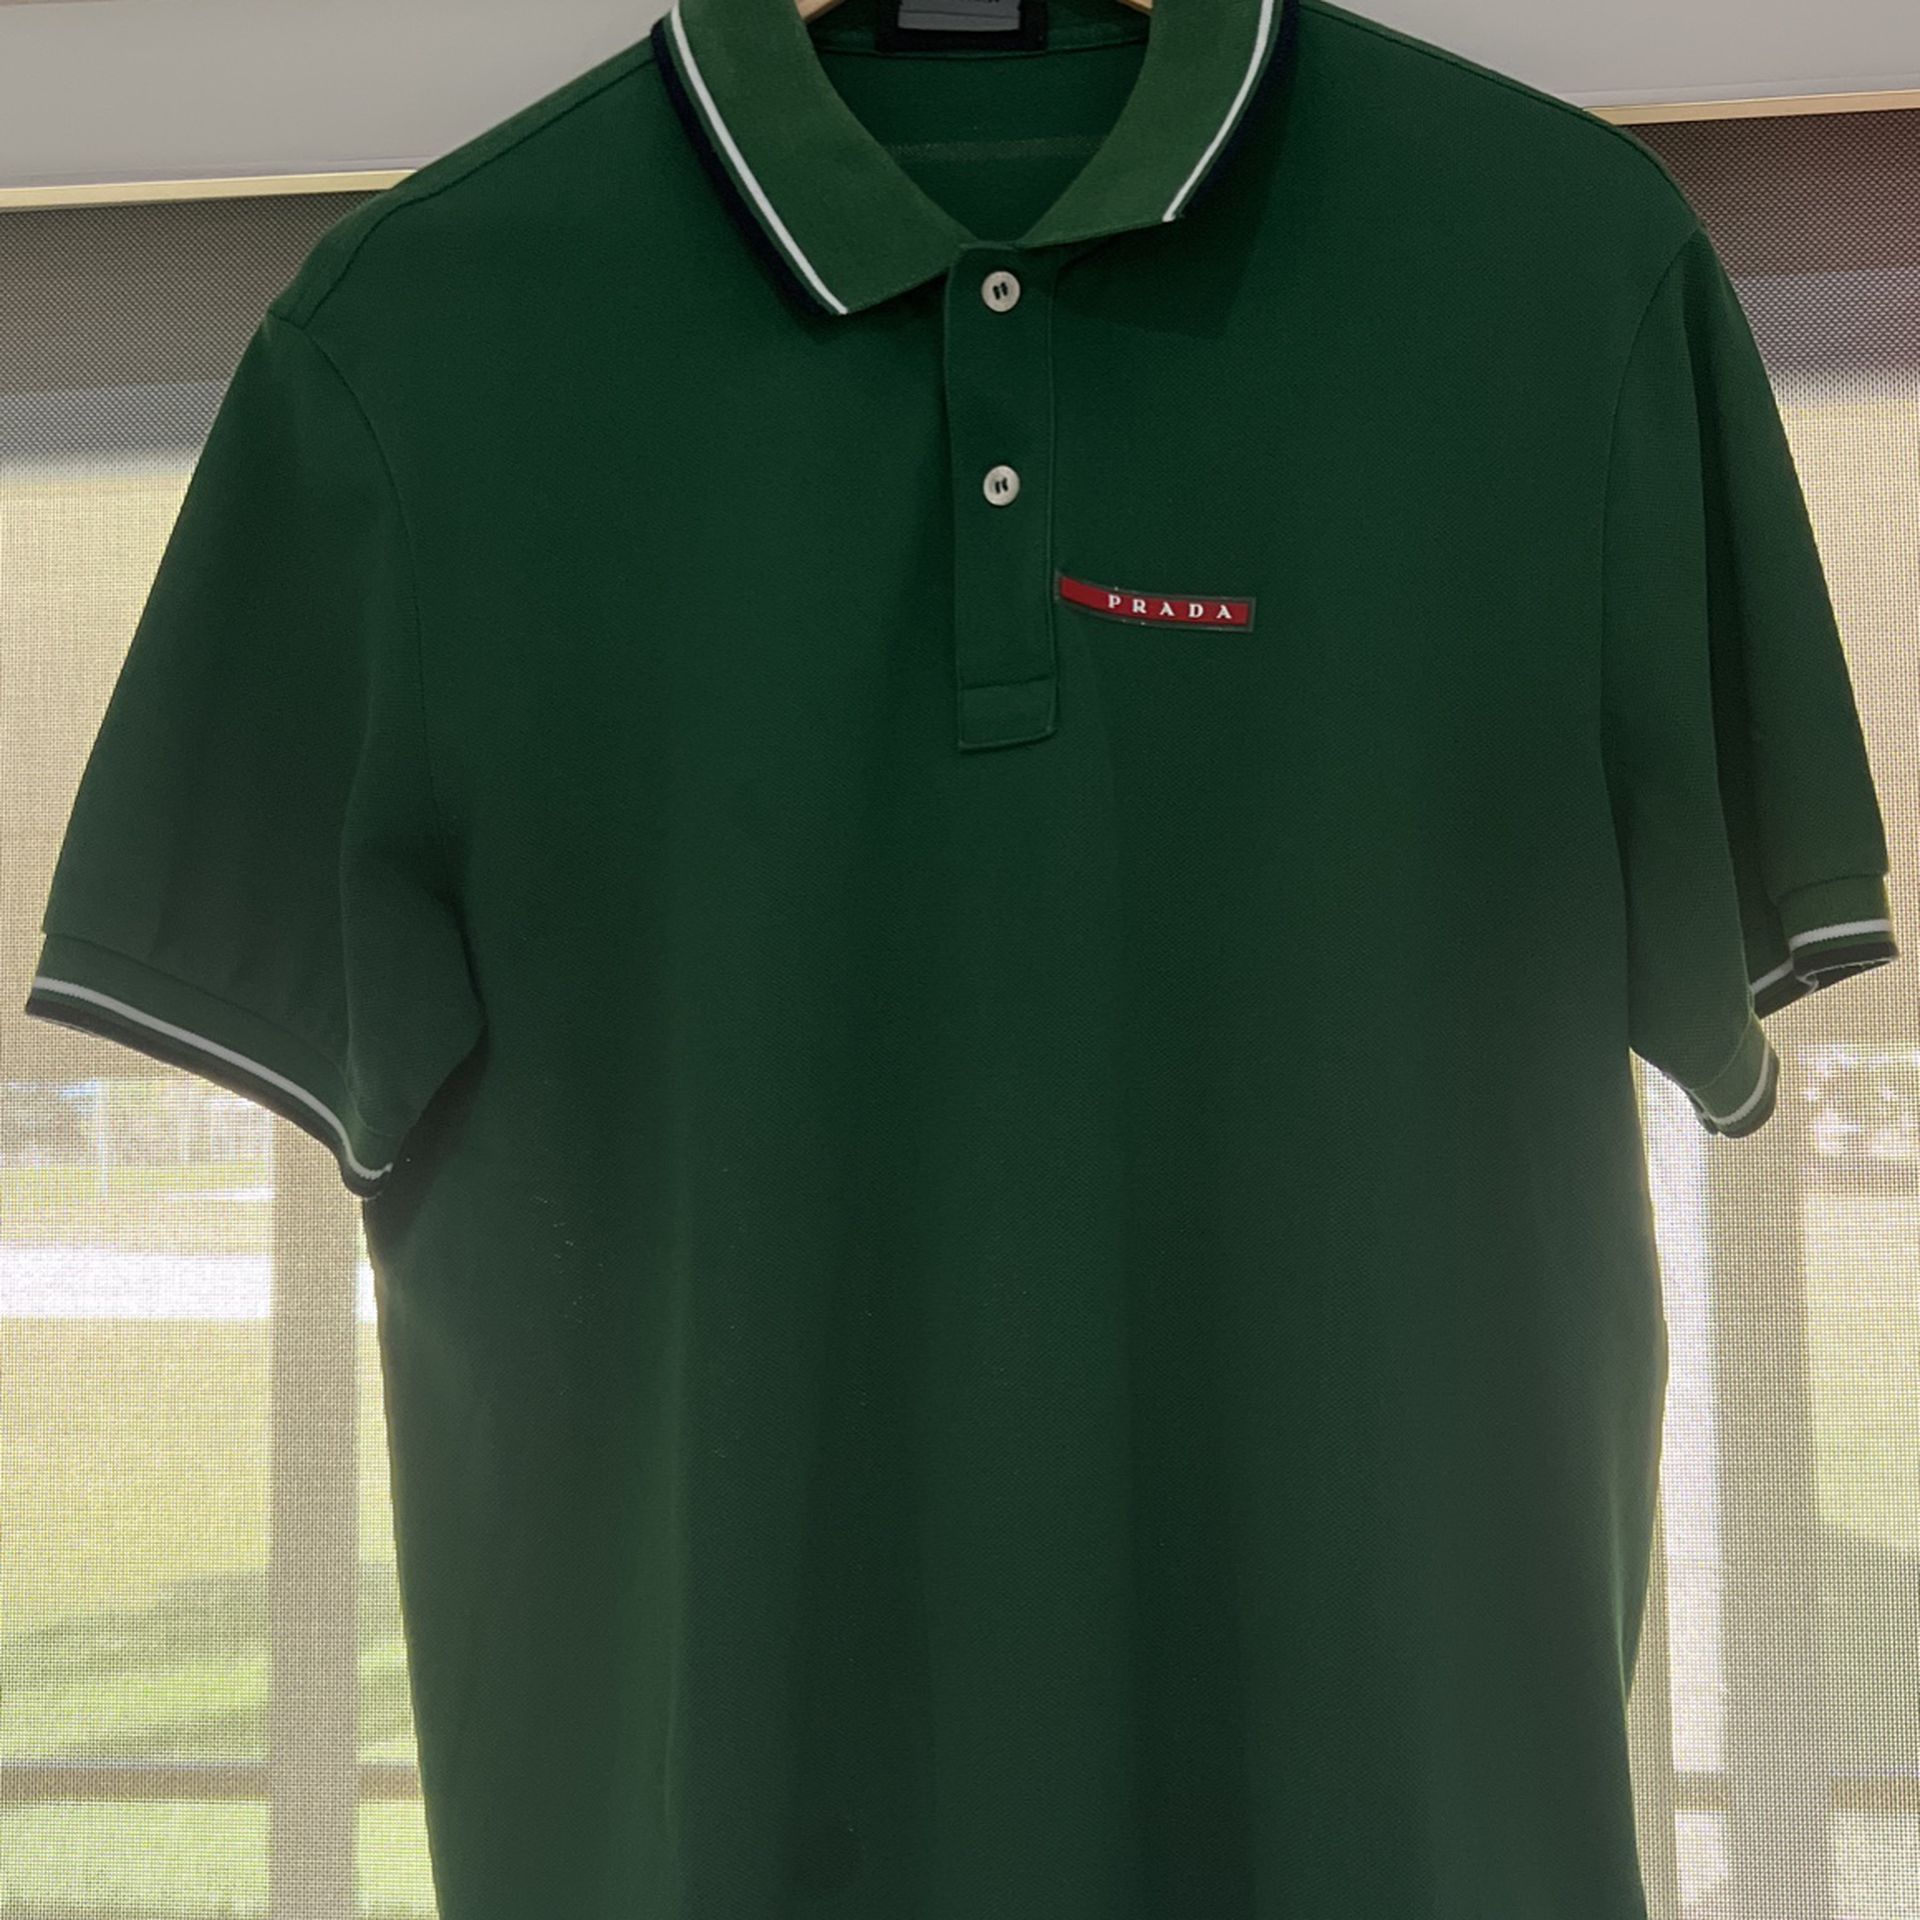 Prada Polo Shirt Size L for Sale in Fort Lauderdale, FL - OfferUp